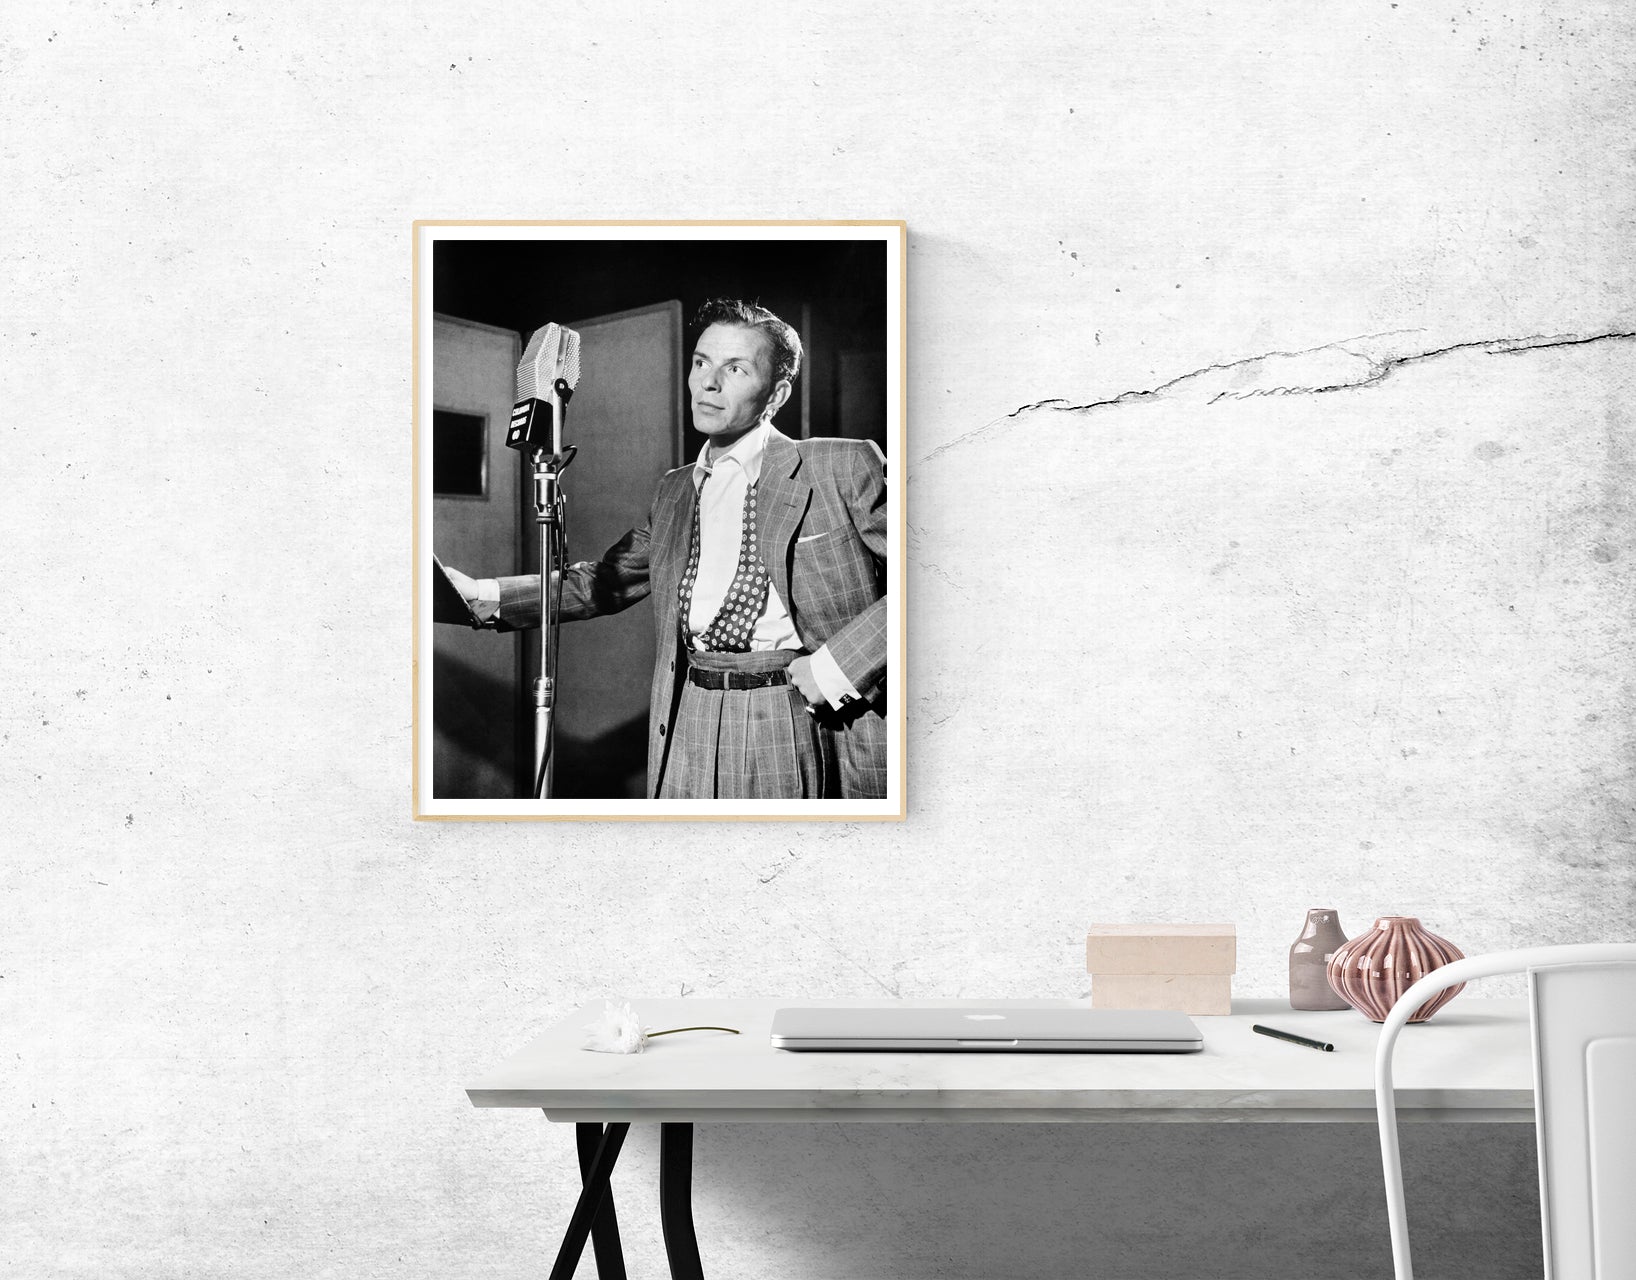 A mockup of a framed paper print of Frank Sinatra, hanging on a white wall above a desk